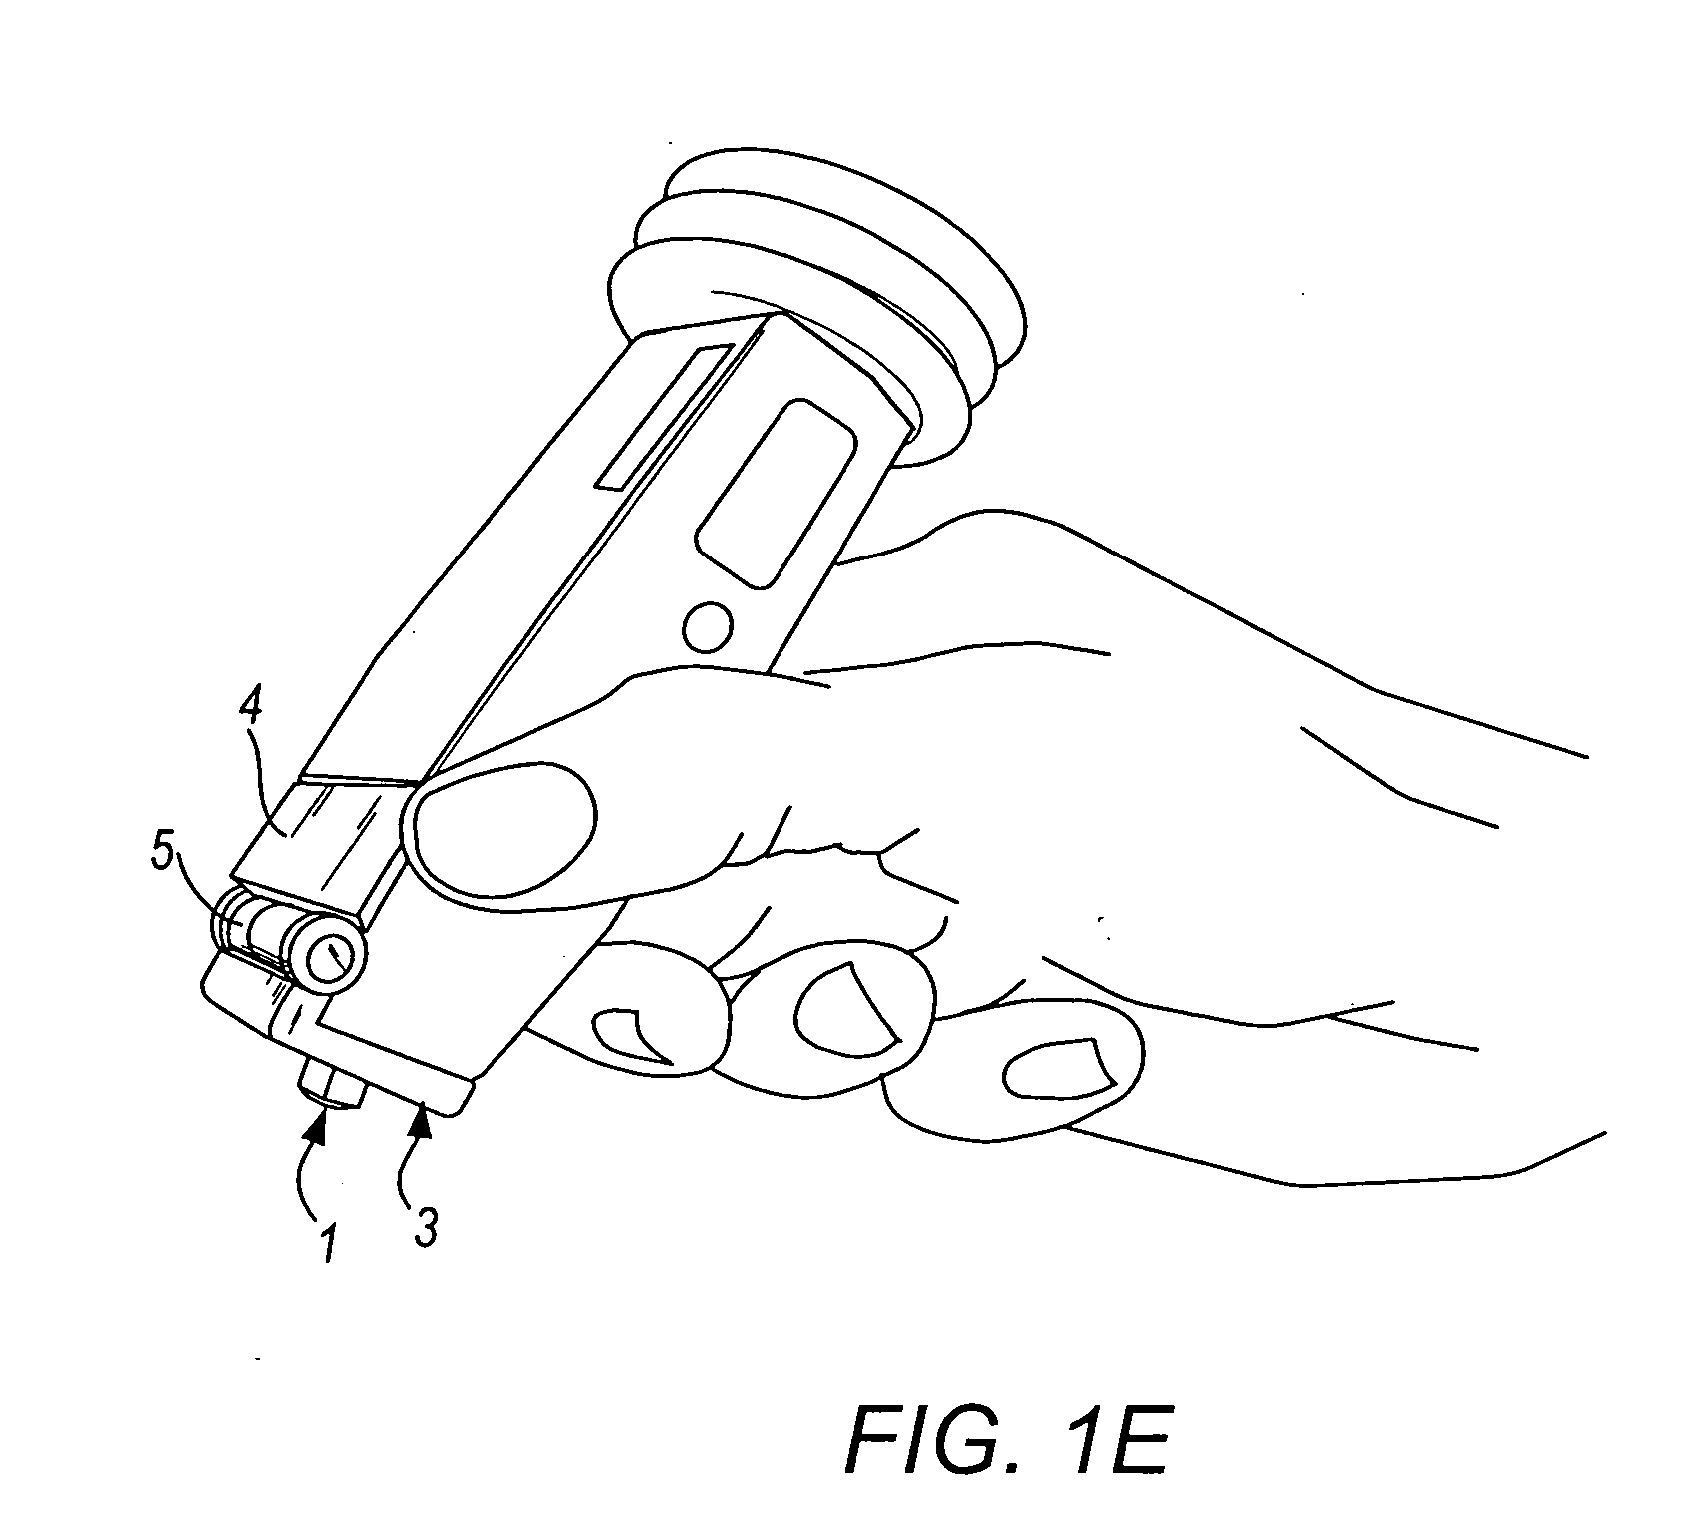 Method and device for marking skin during an ultrasound examination